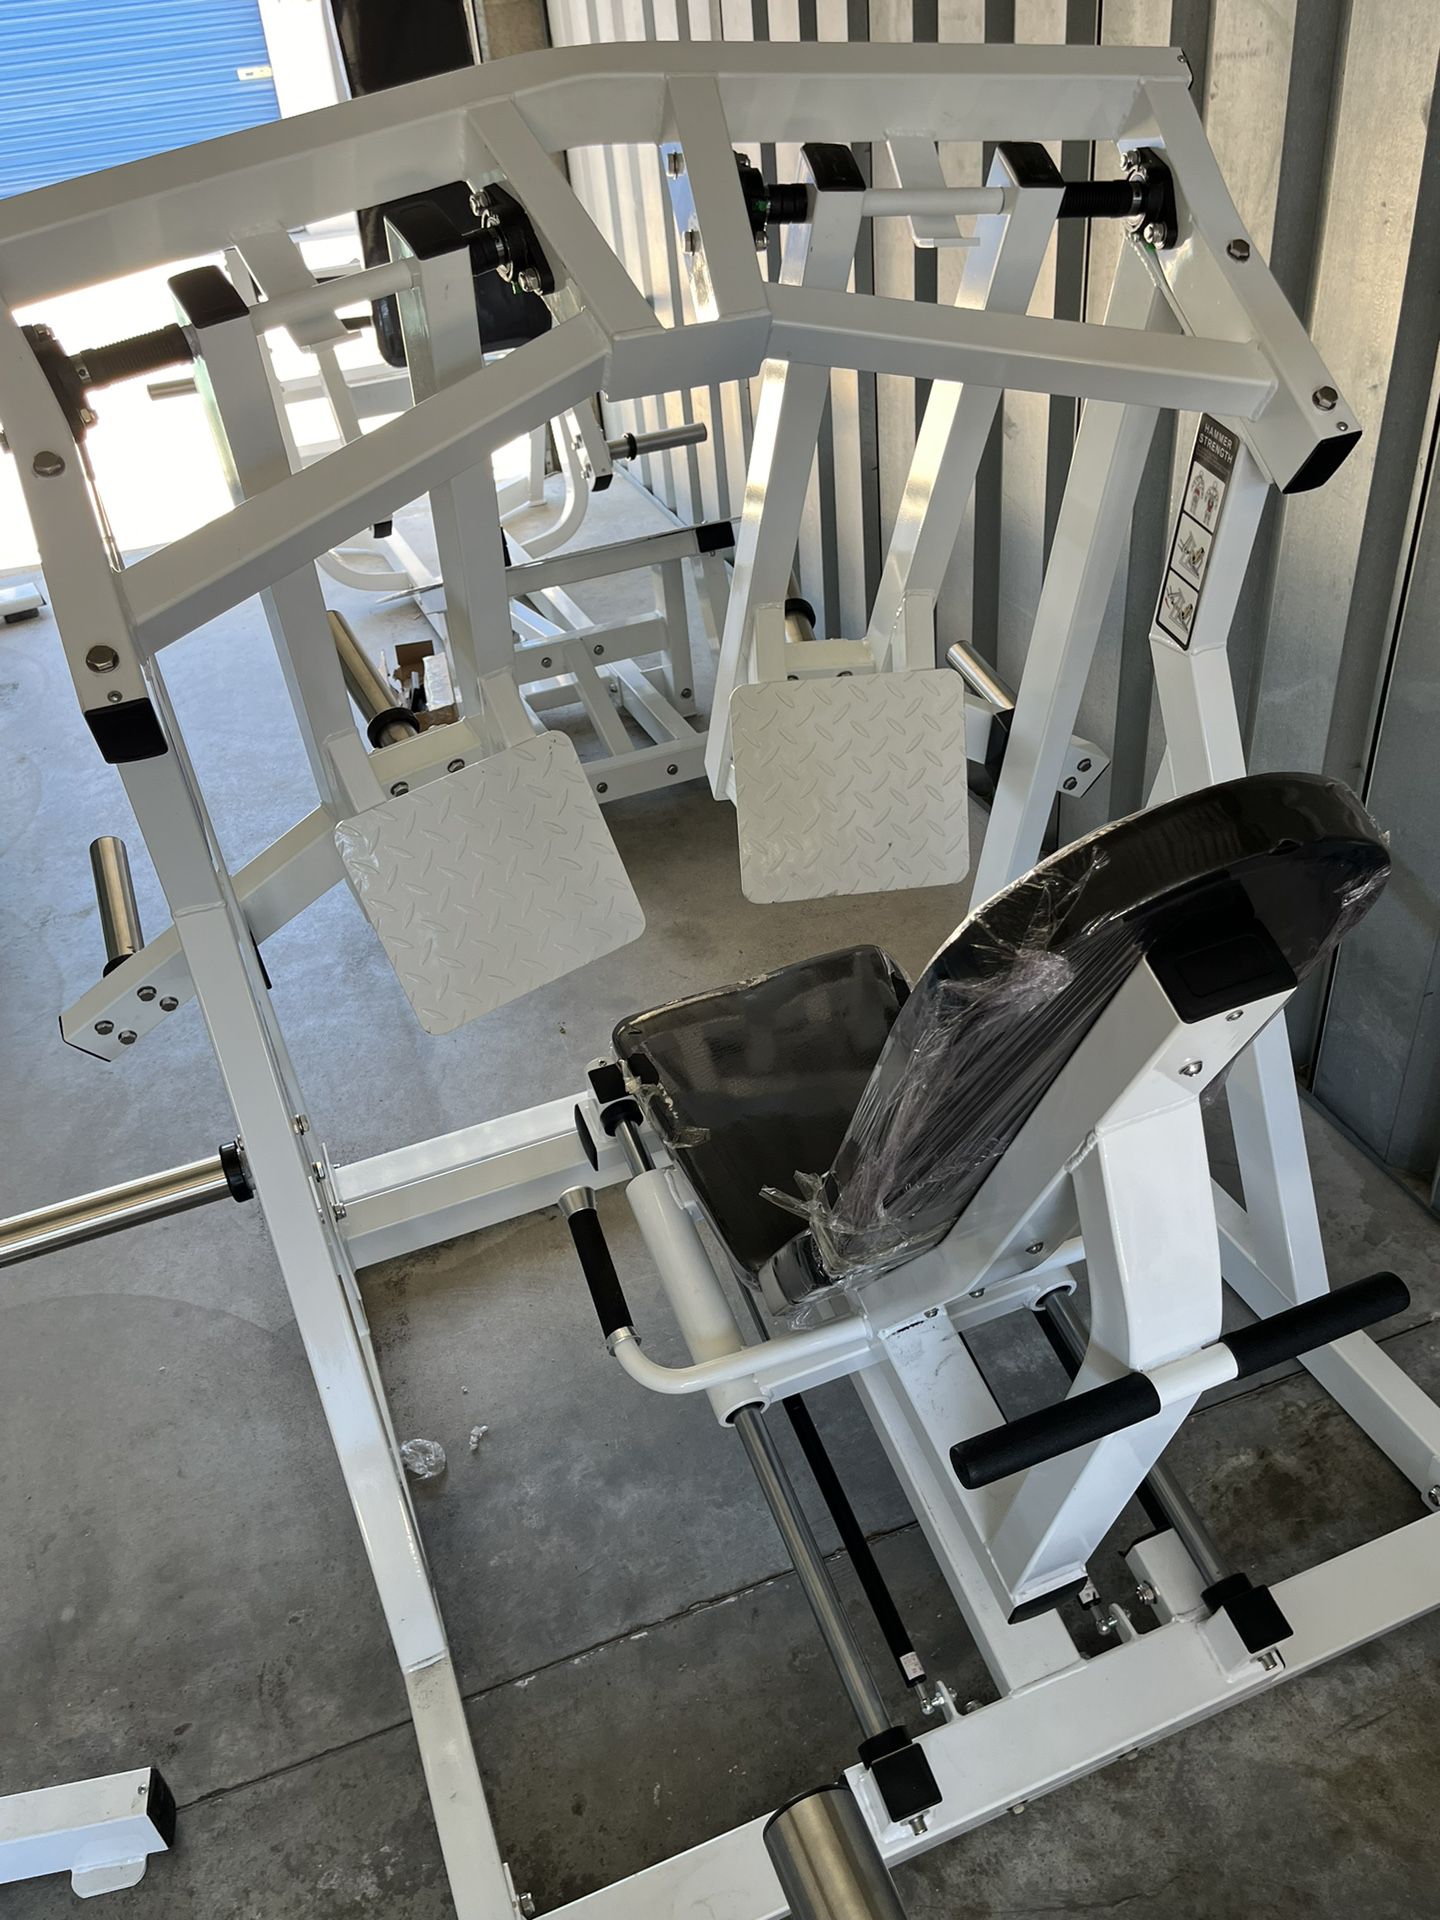 Gym equipment for sale! 